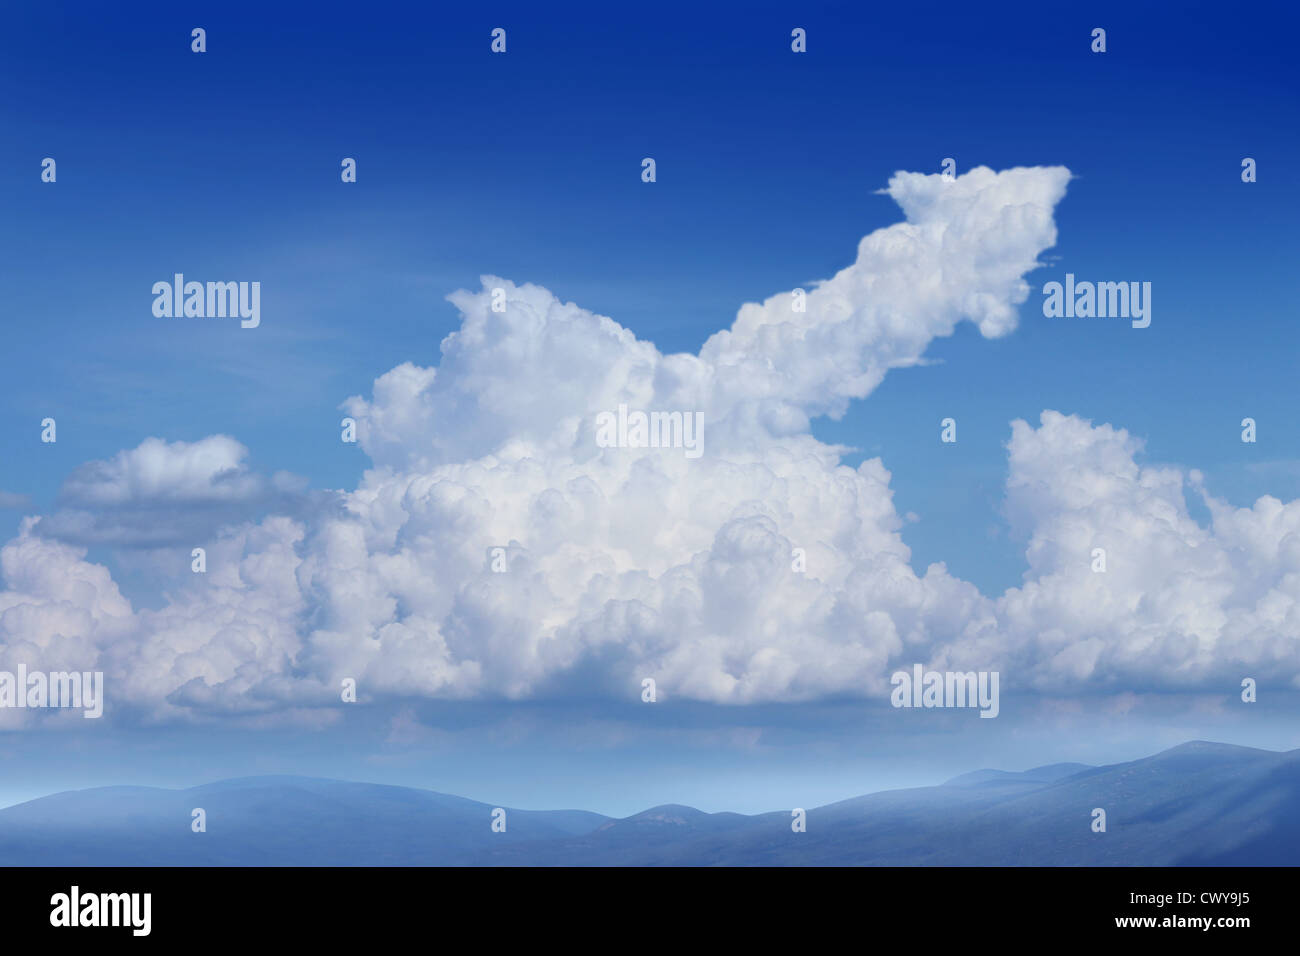 Success Dreams with a blue sky background and a cumulus cloud in the shape of an upward arrow as a financial concept for planning and dreaming about future strategy. Stock Photo